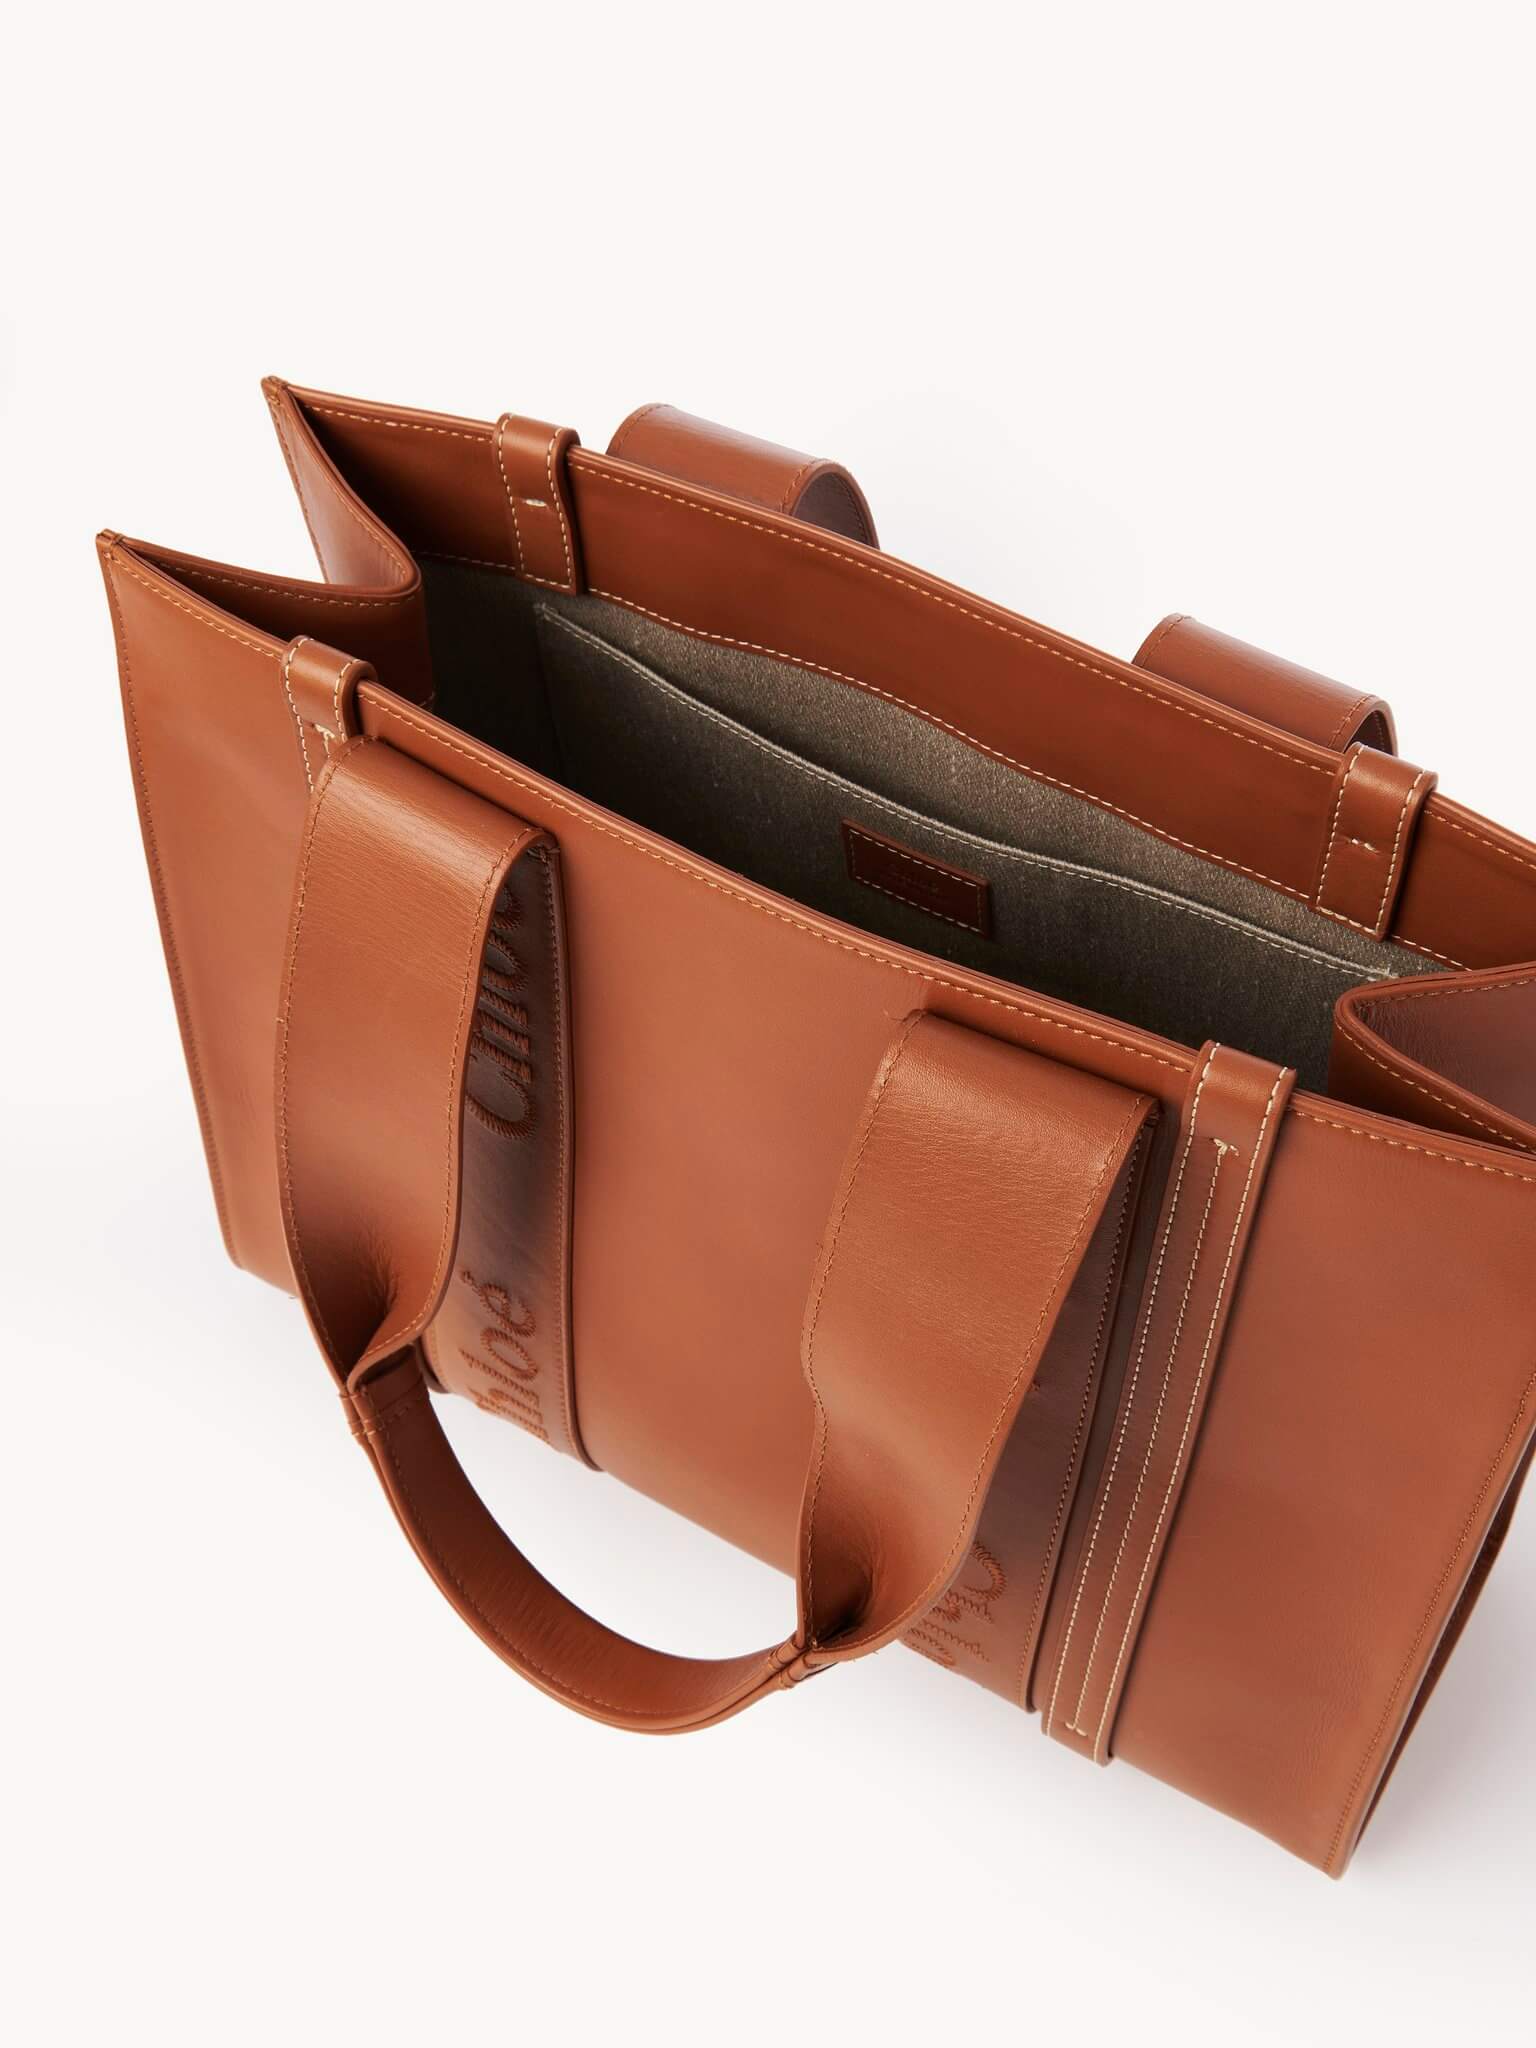 Chloé Woody Medium Leather Tote in Caramel available at The New Trend